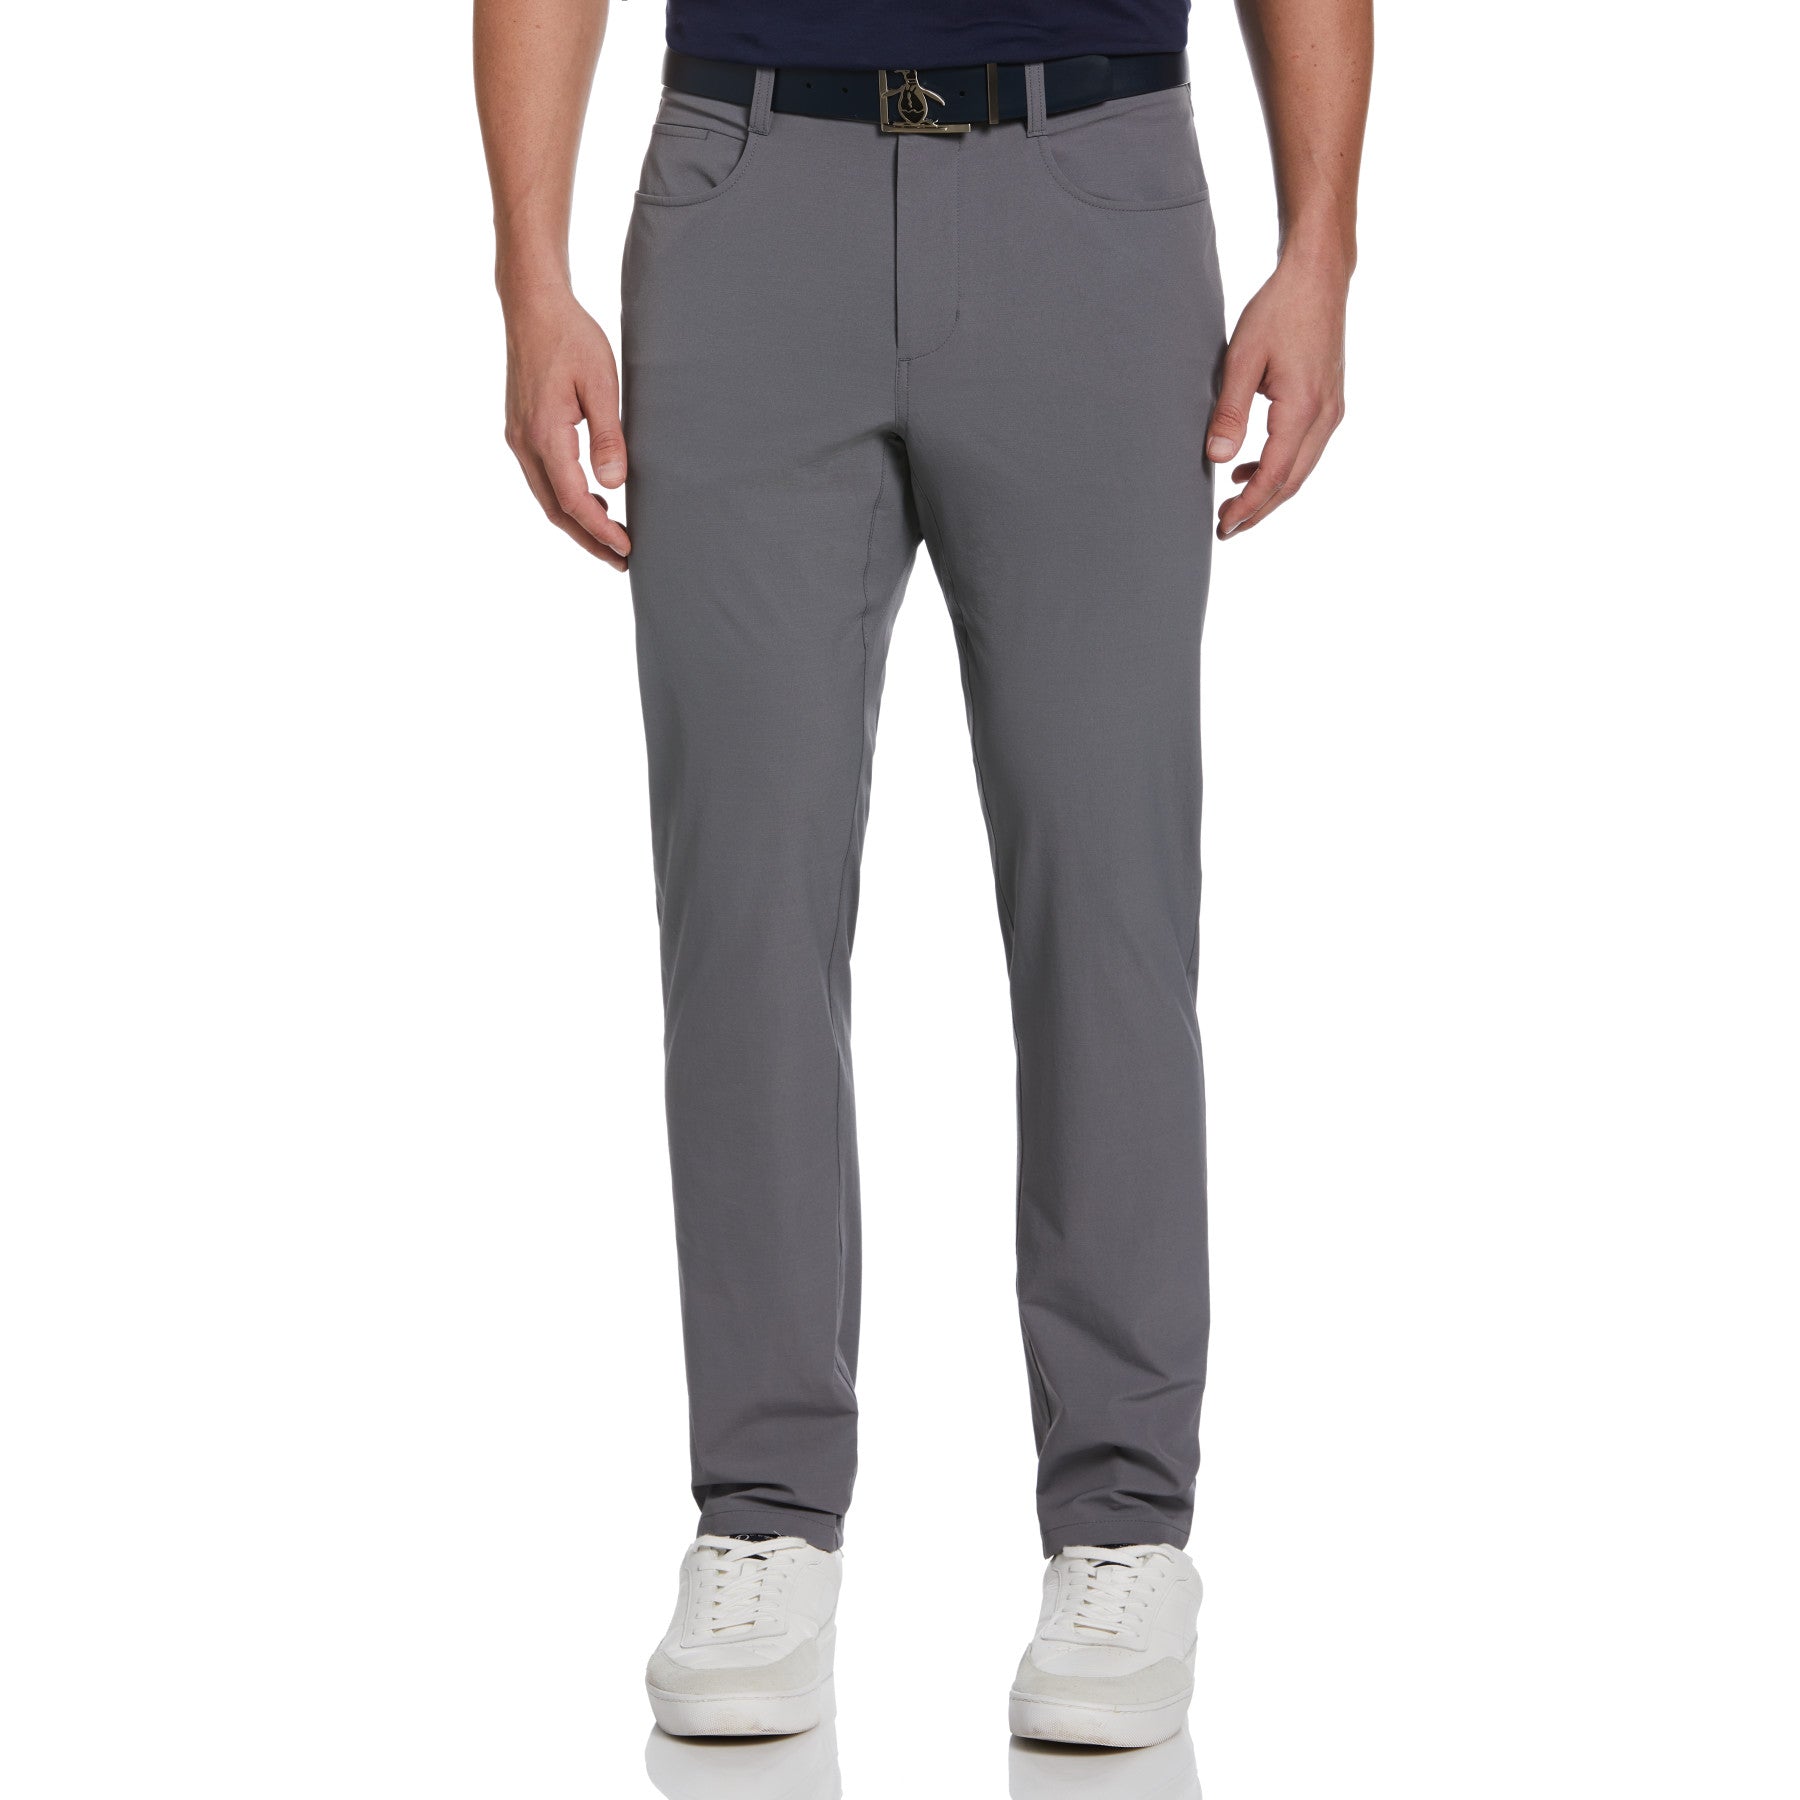 View Performance Crossover Golf Trouser In Quiet Shade information